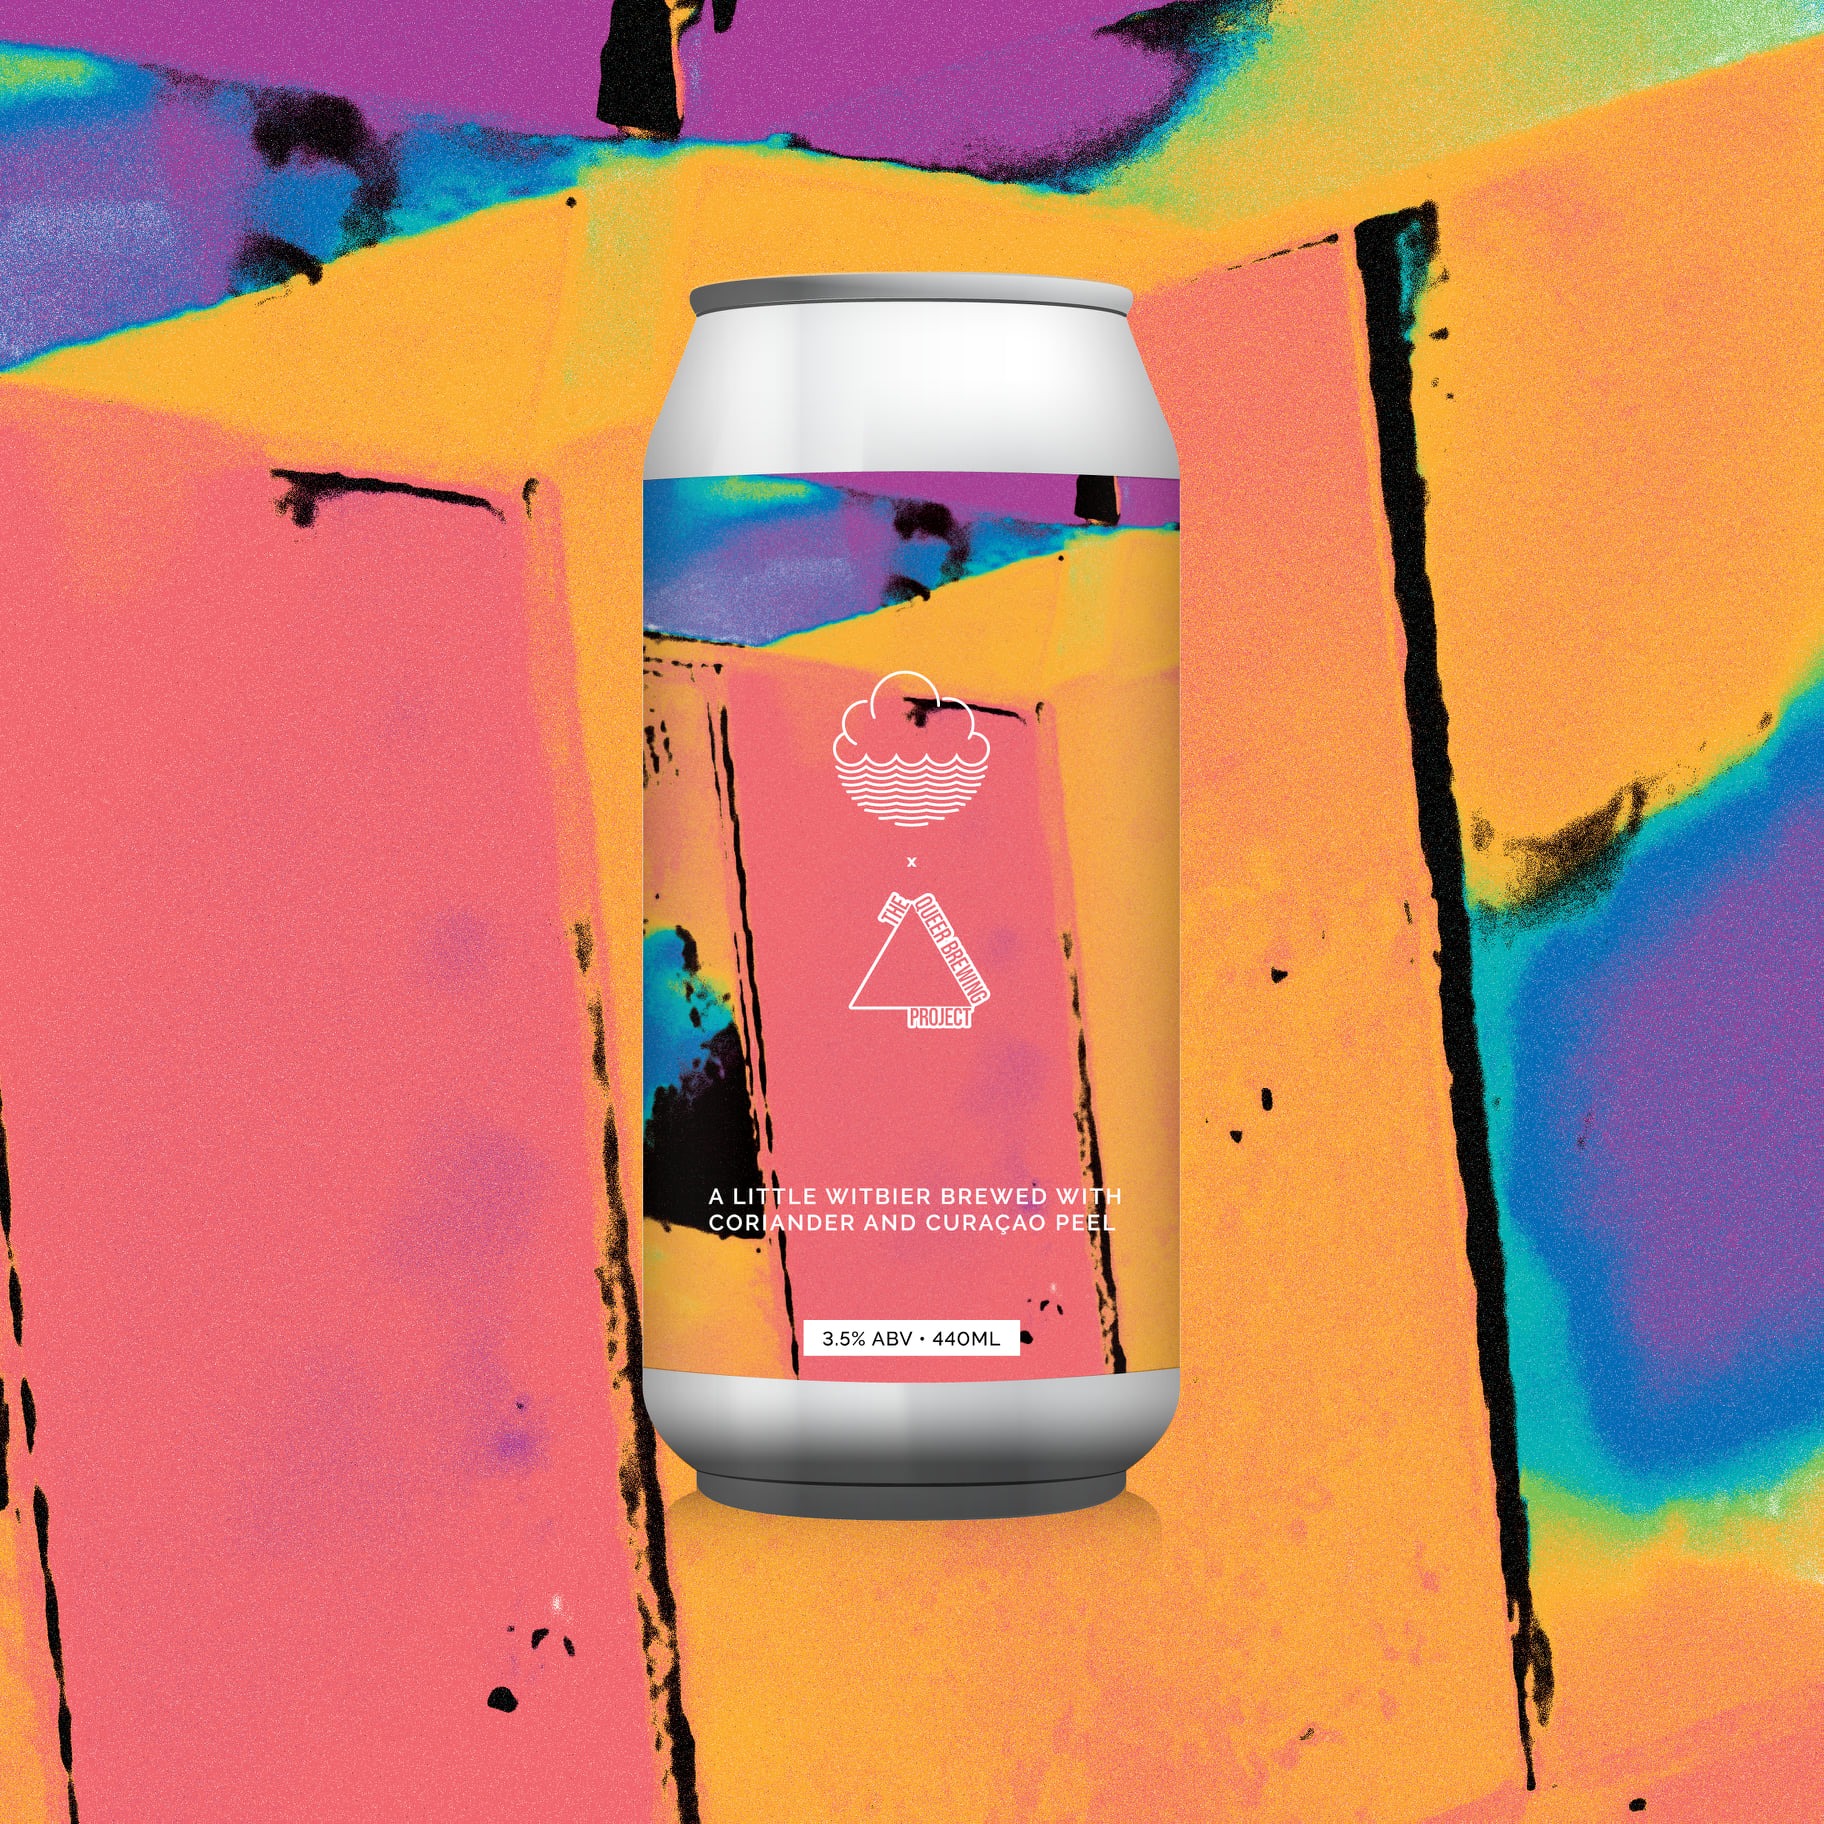 queer brewing statement of intent with cloudwater